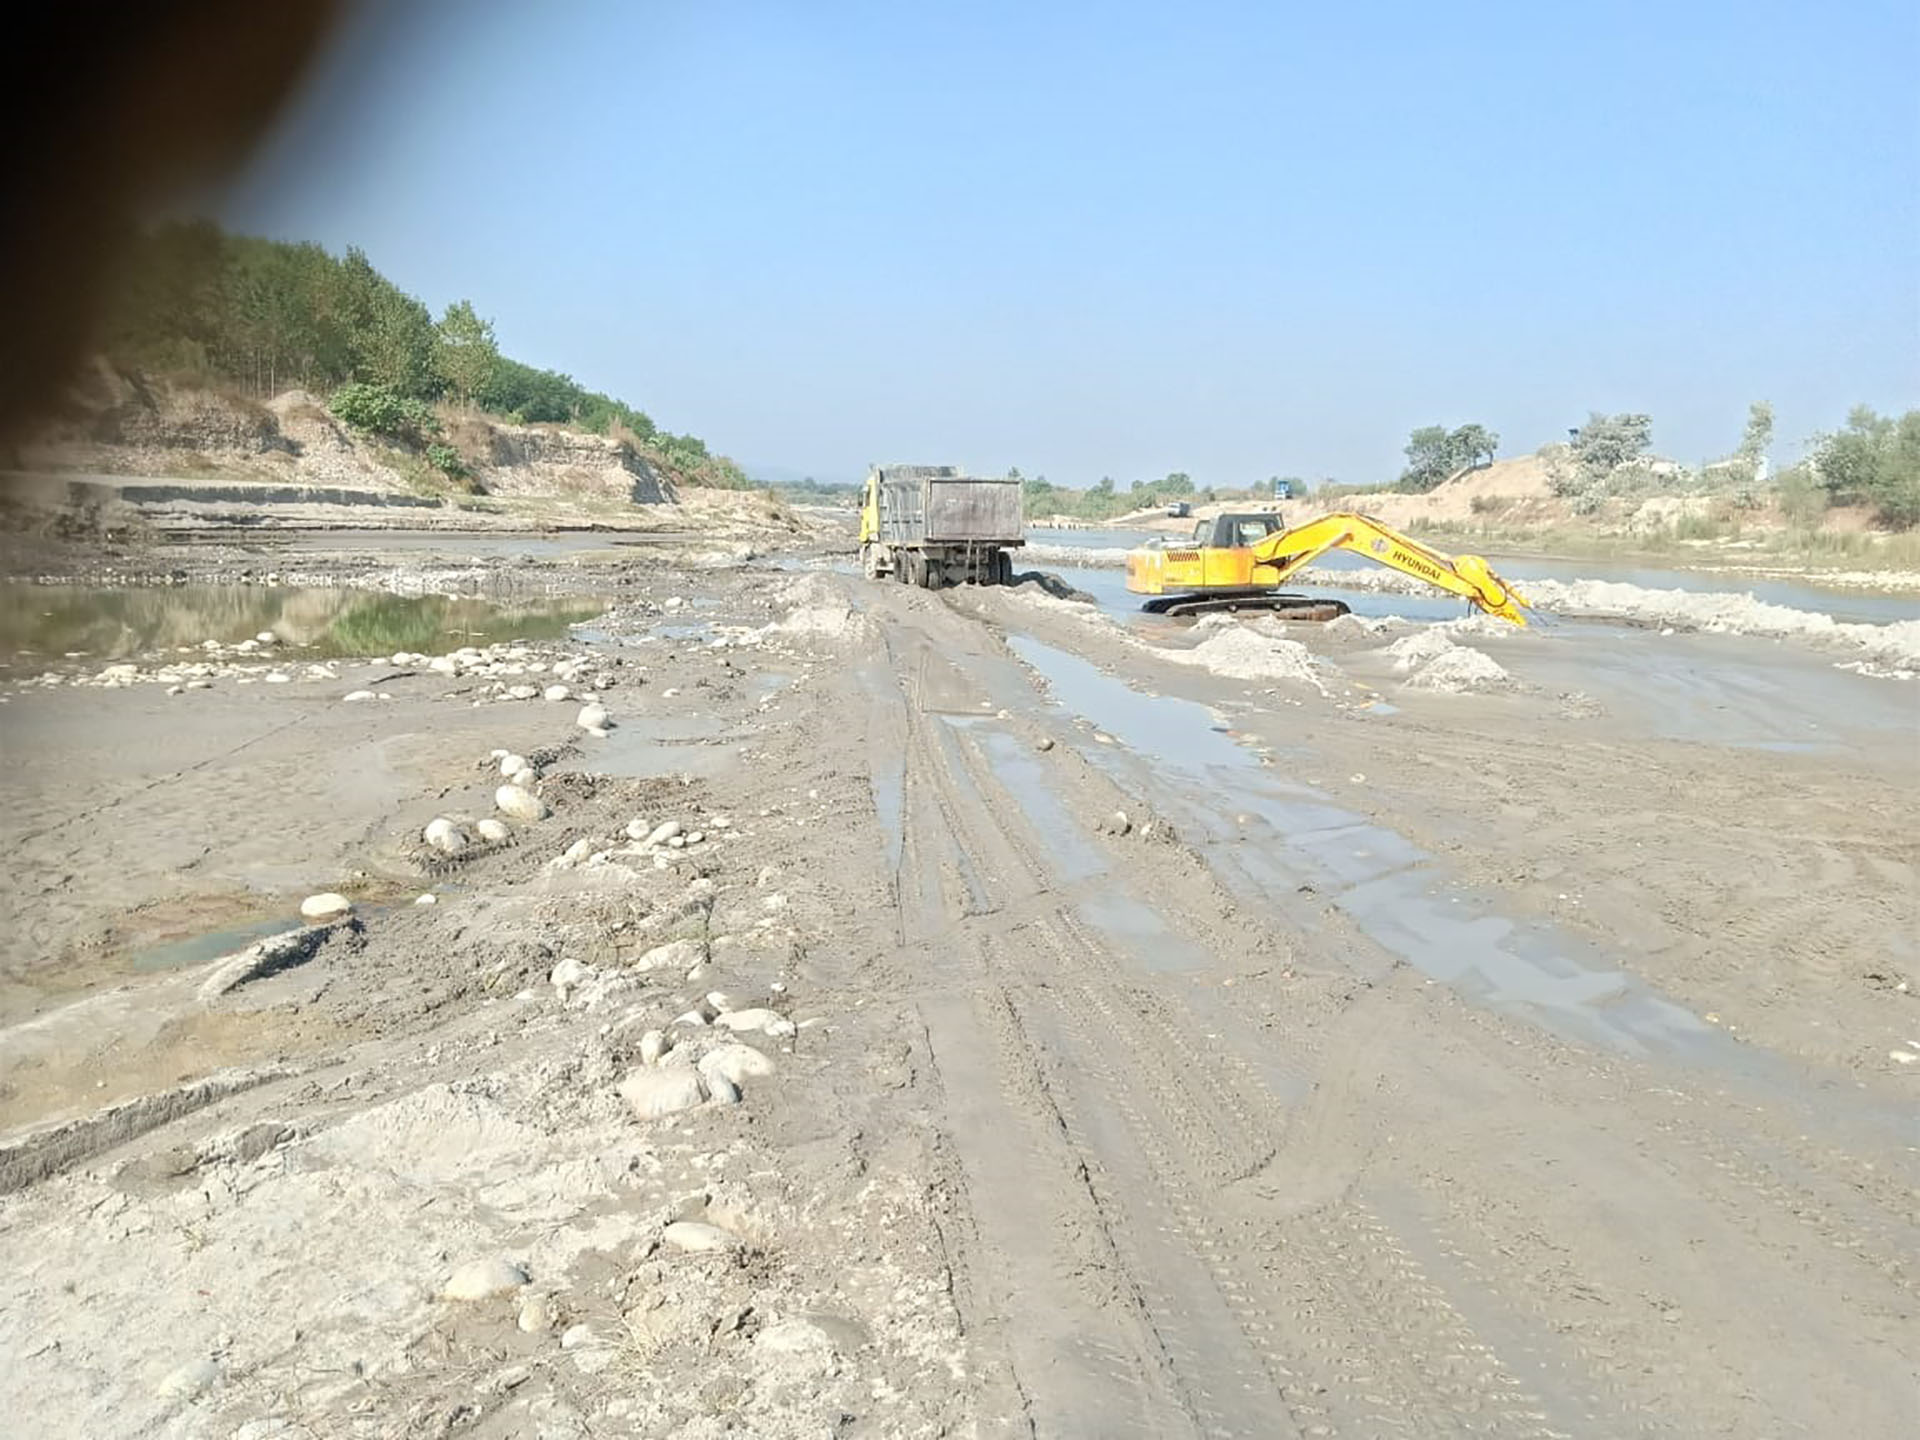 Mining resumes in Ropar, sand prices may decline